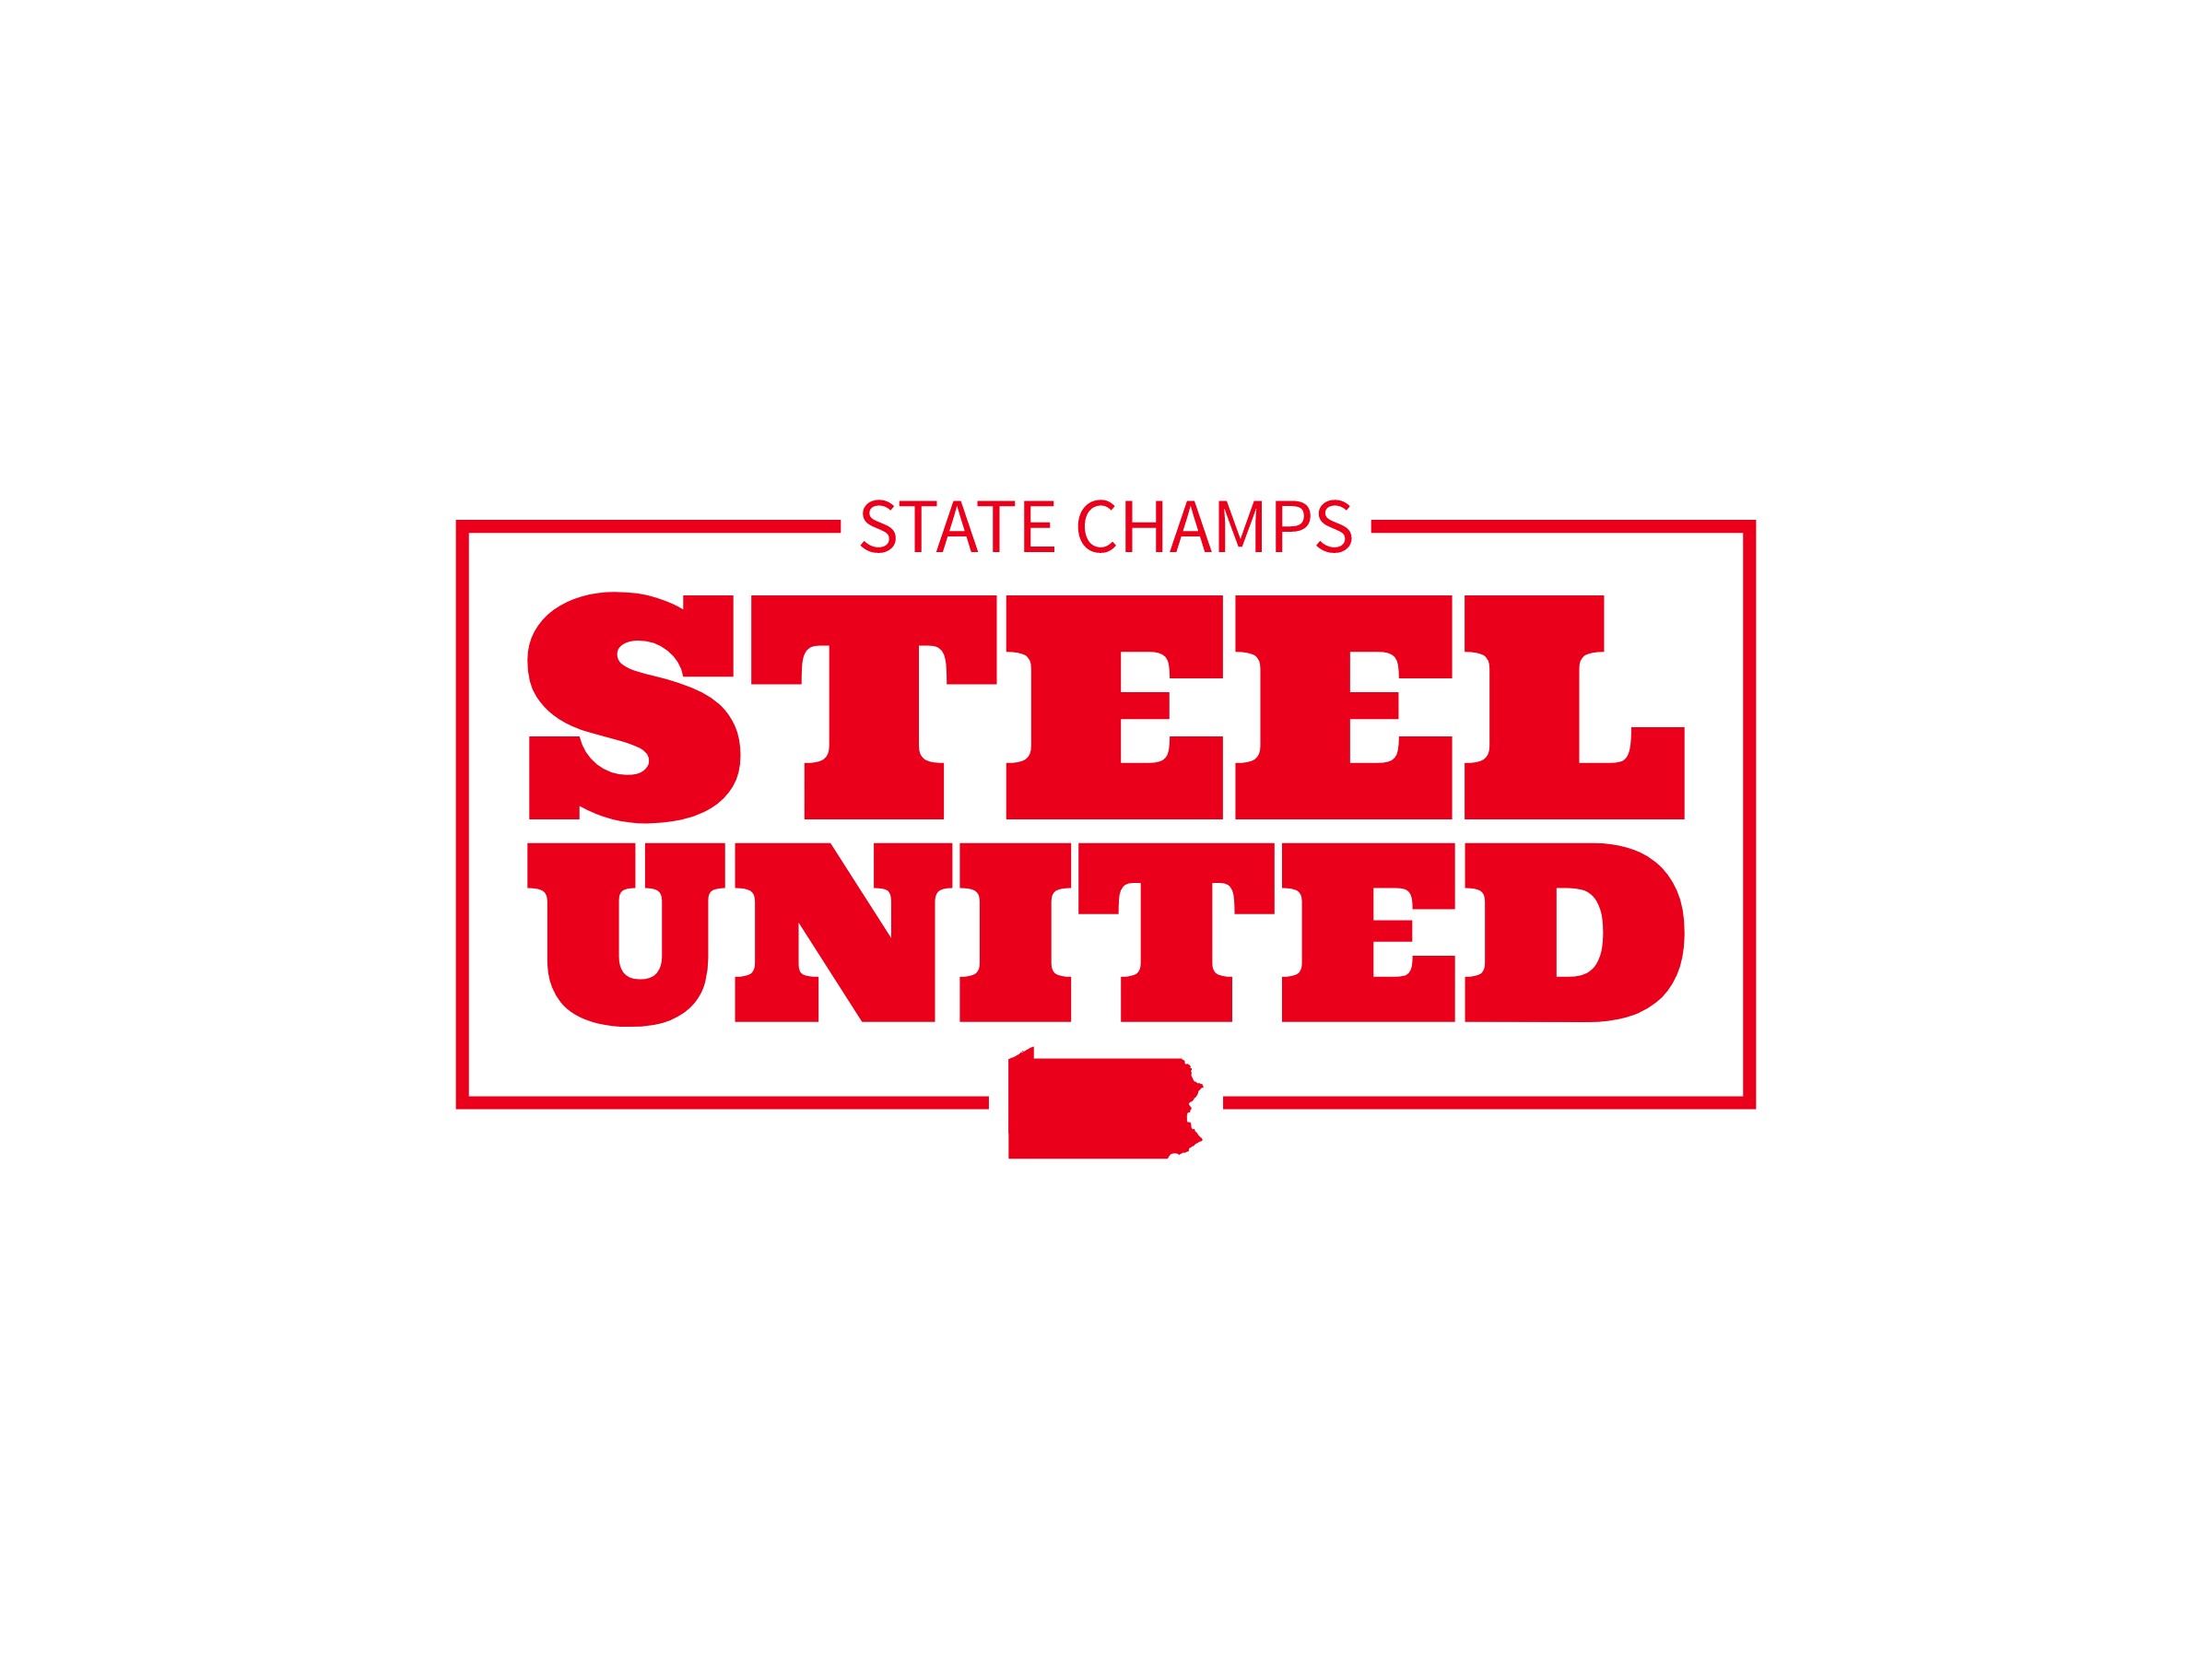 Steel United - State Champs